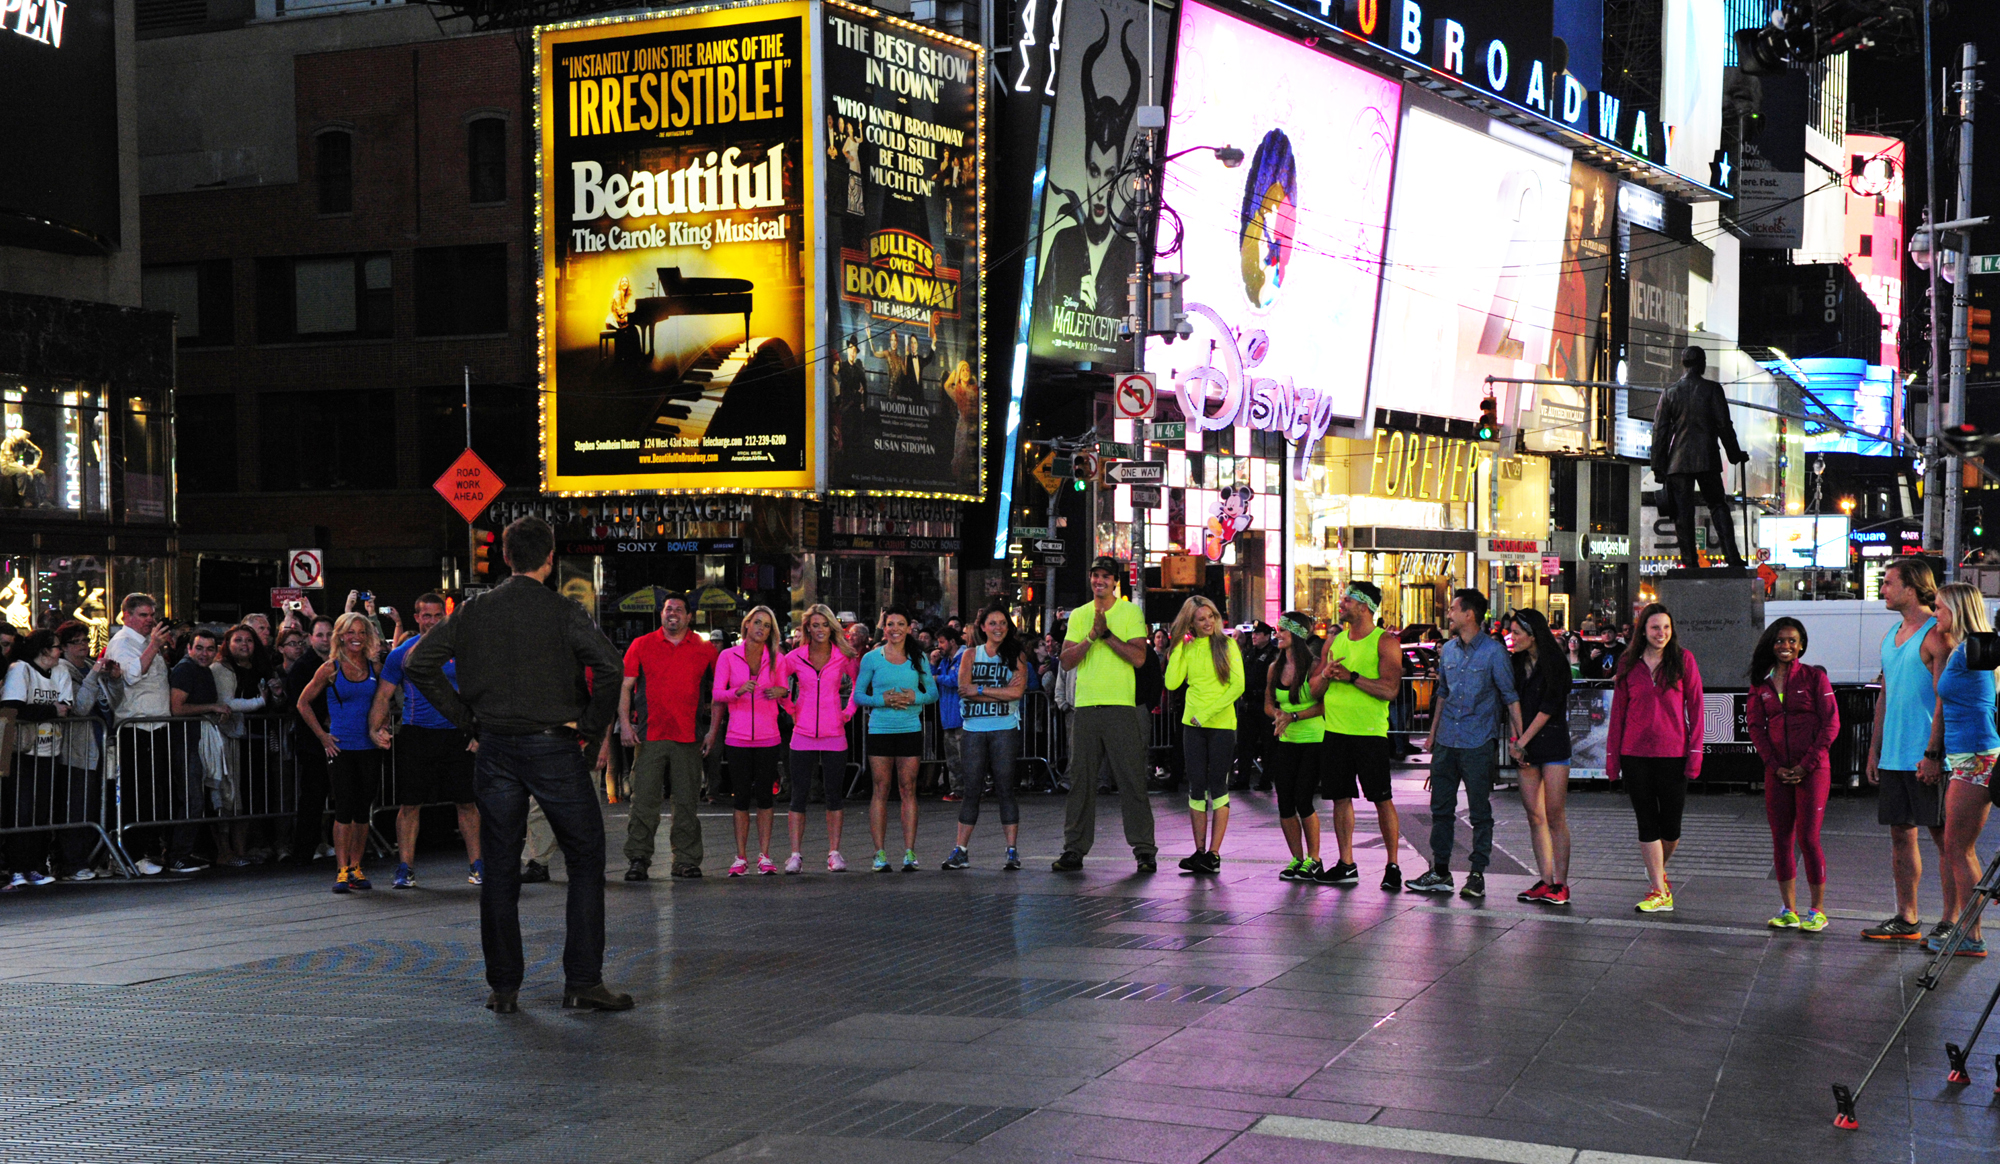 The Amazing Race in Times Square